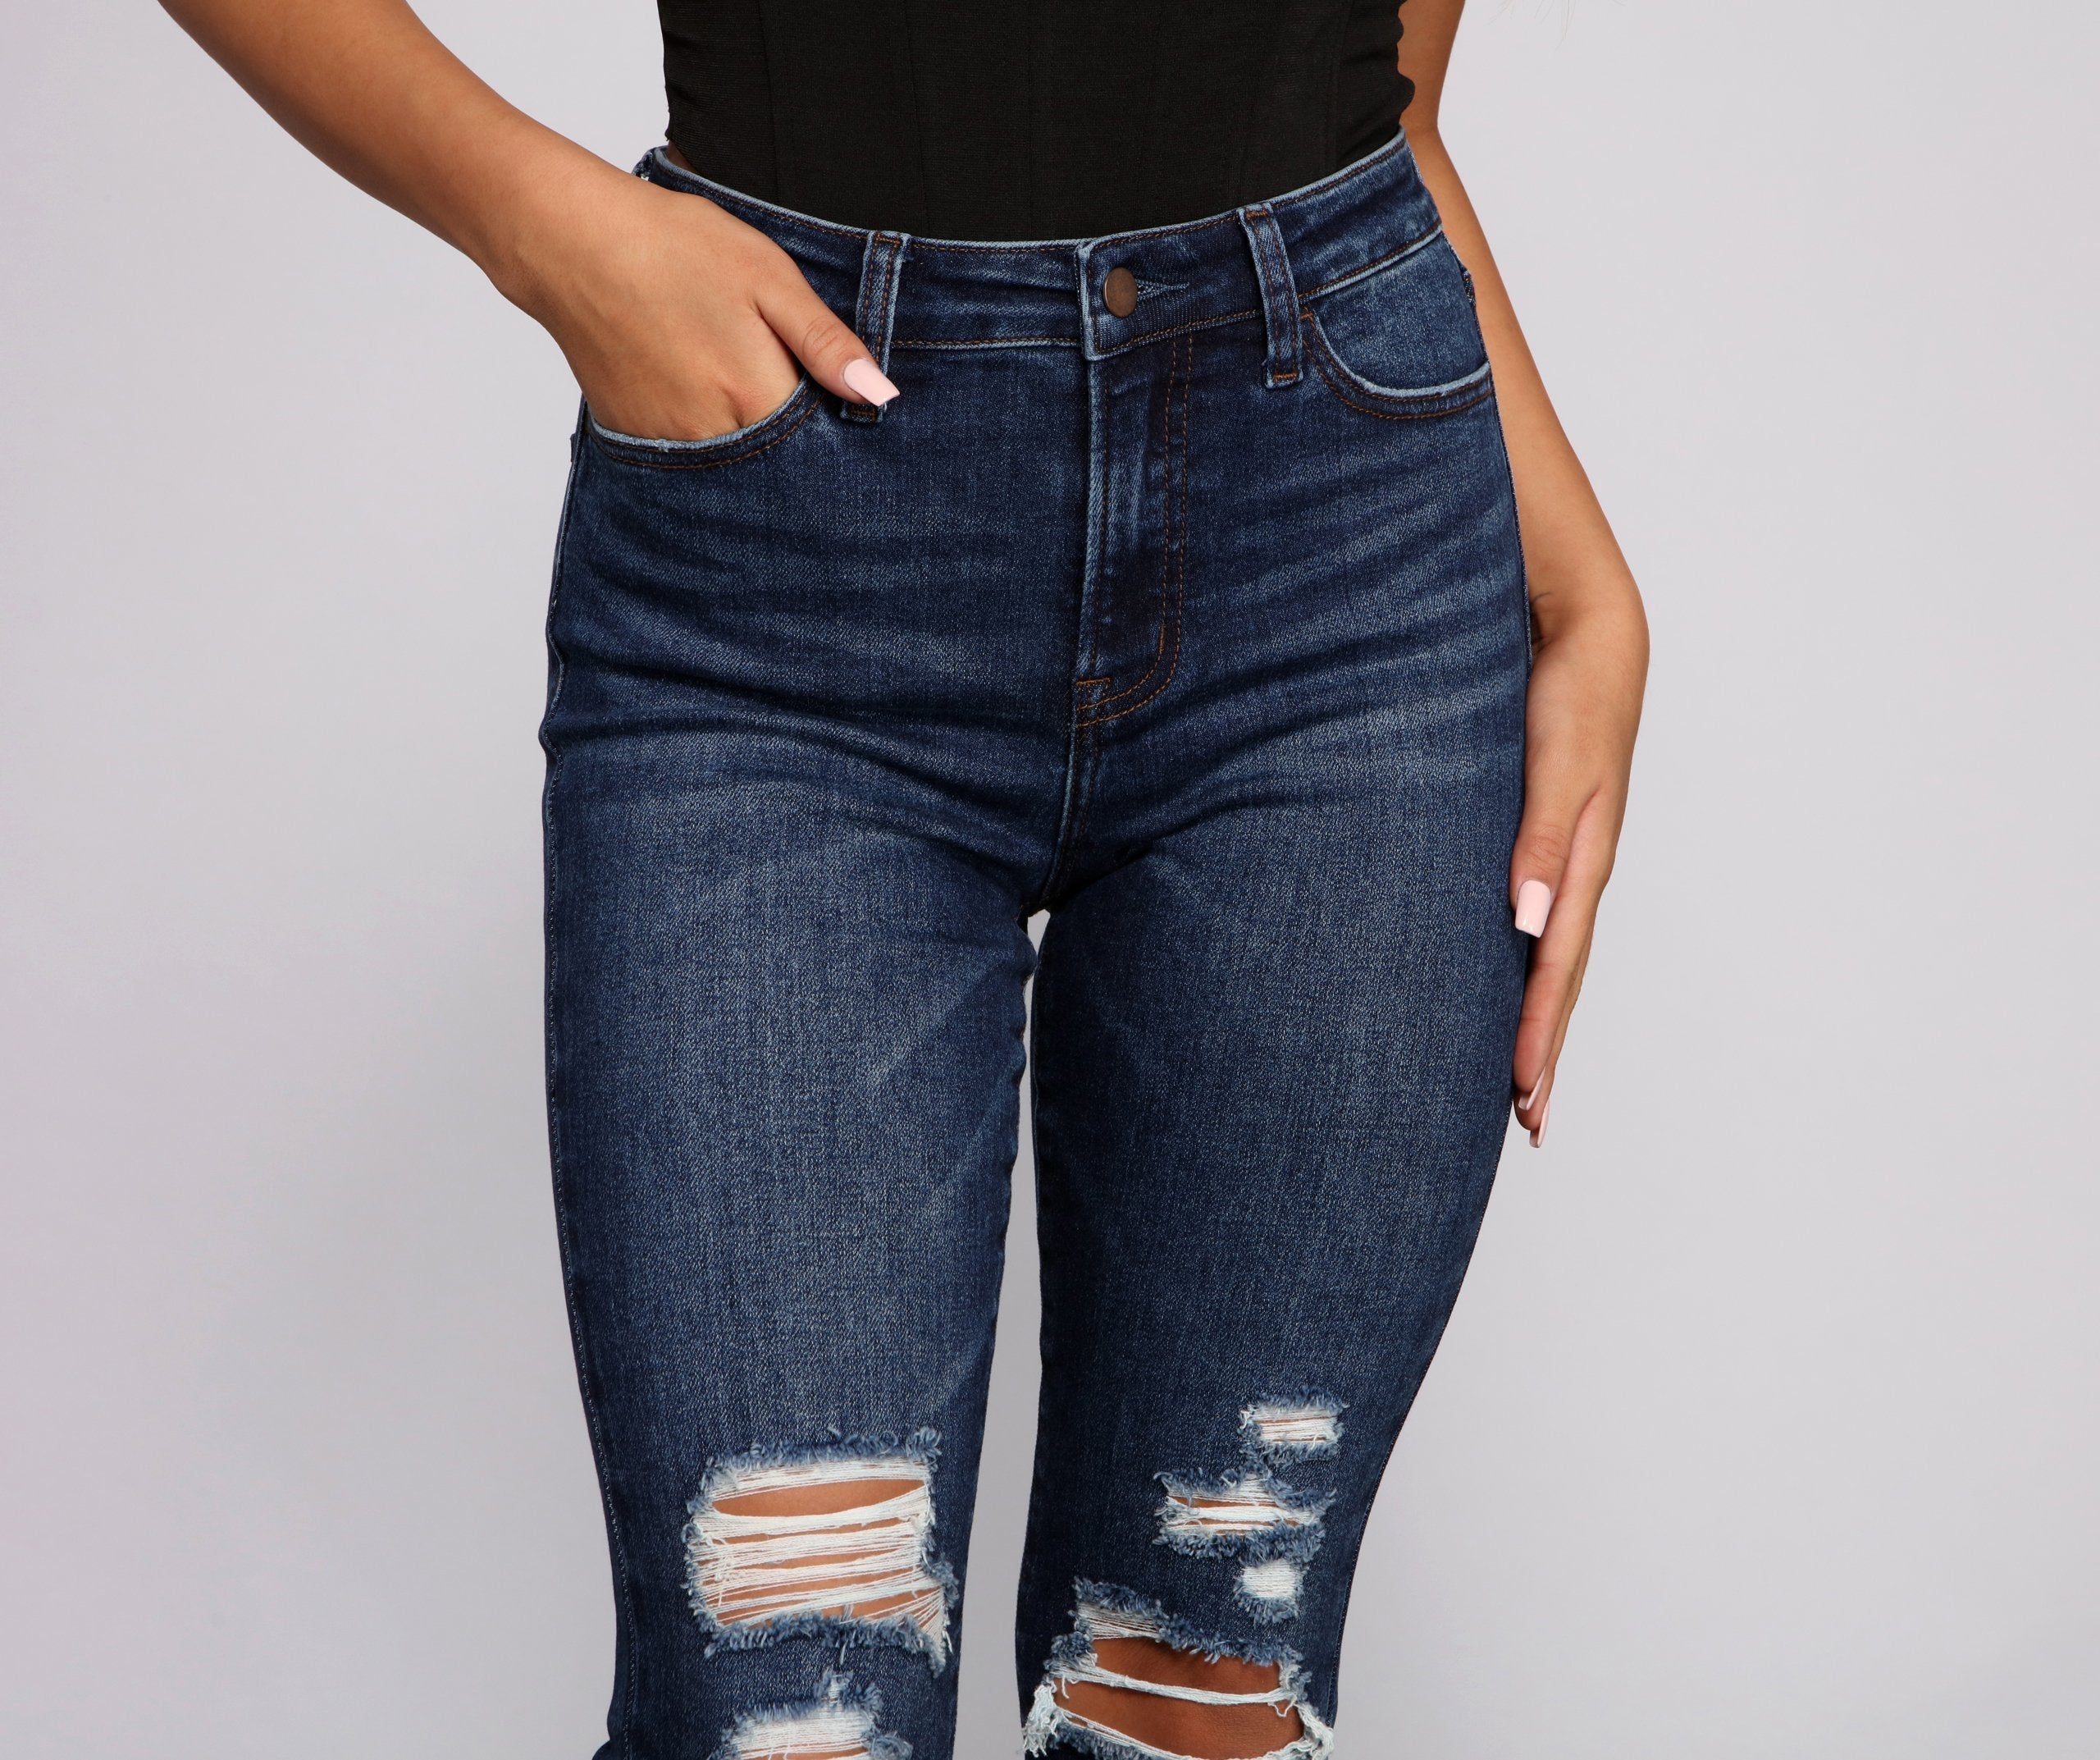 So Extra High Rise Destructed Skinny Jeans